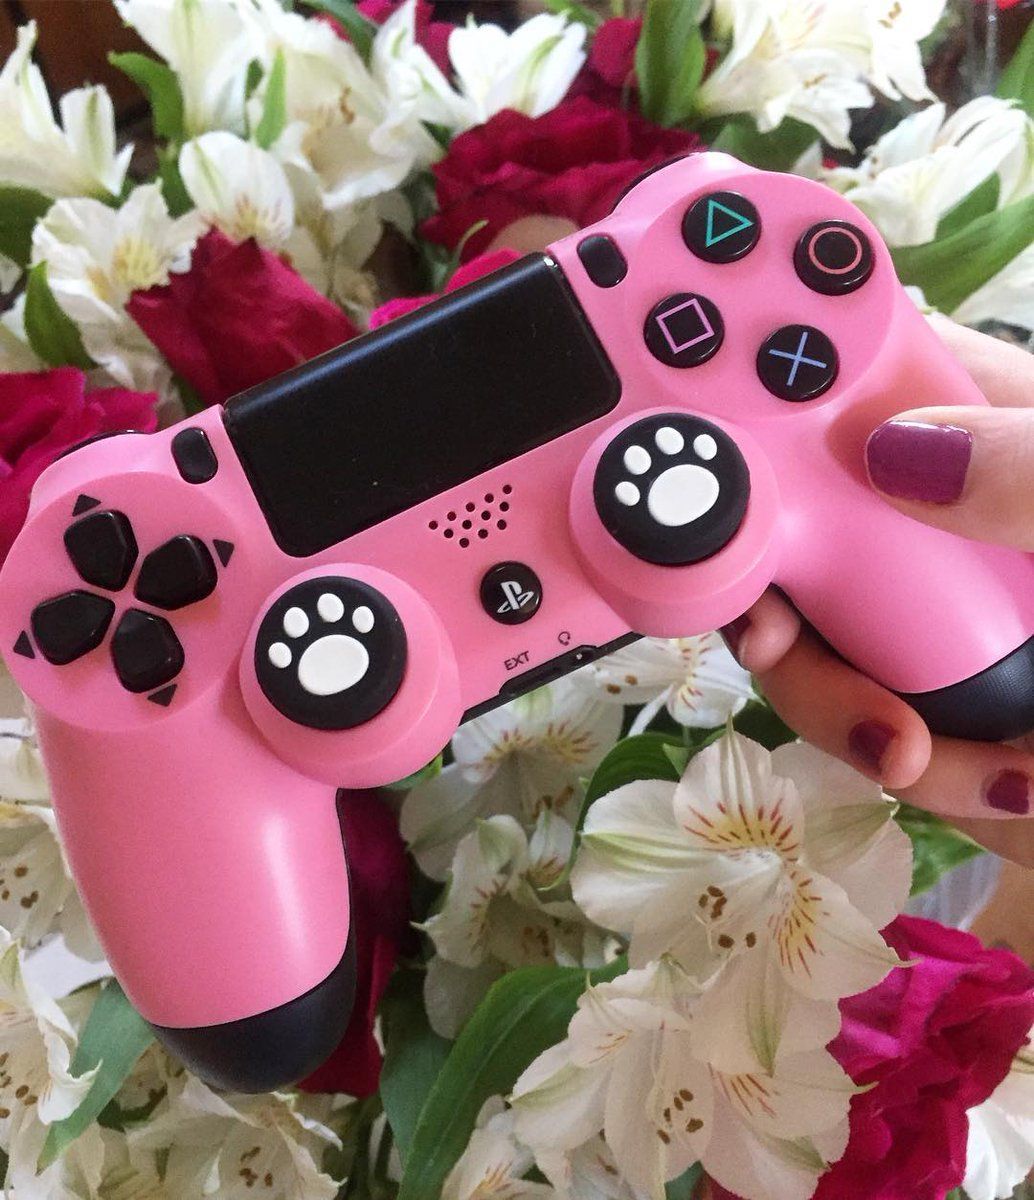 girl gamer pink ps4 controller: I hope you have a fun and stress free weekend!. Gamer room, Gamer girl, Pink games